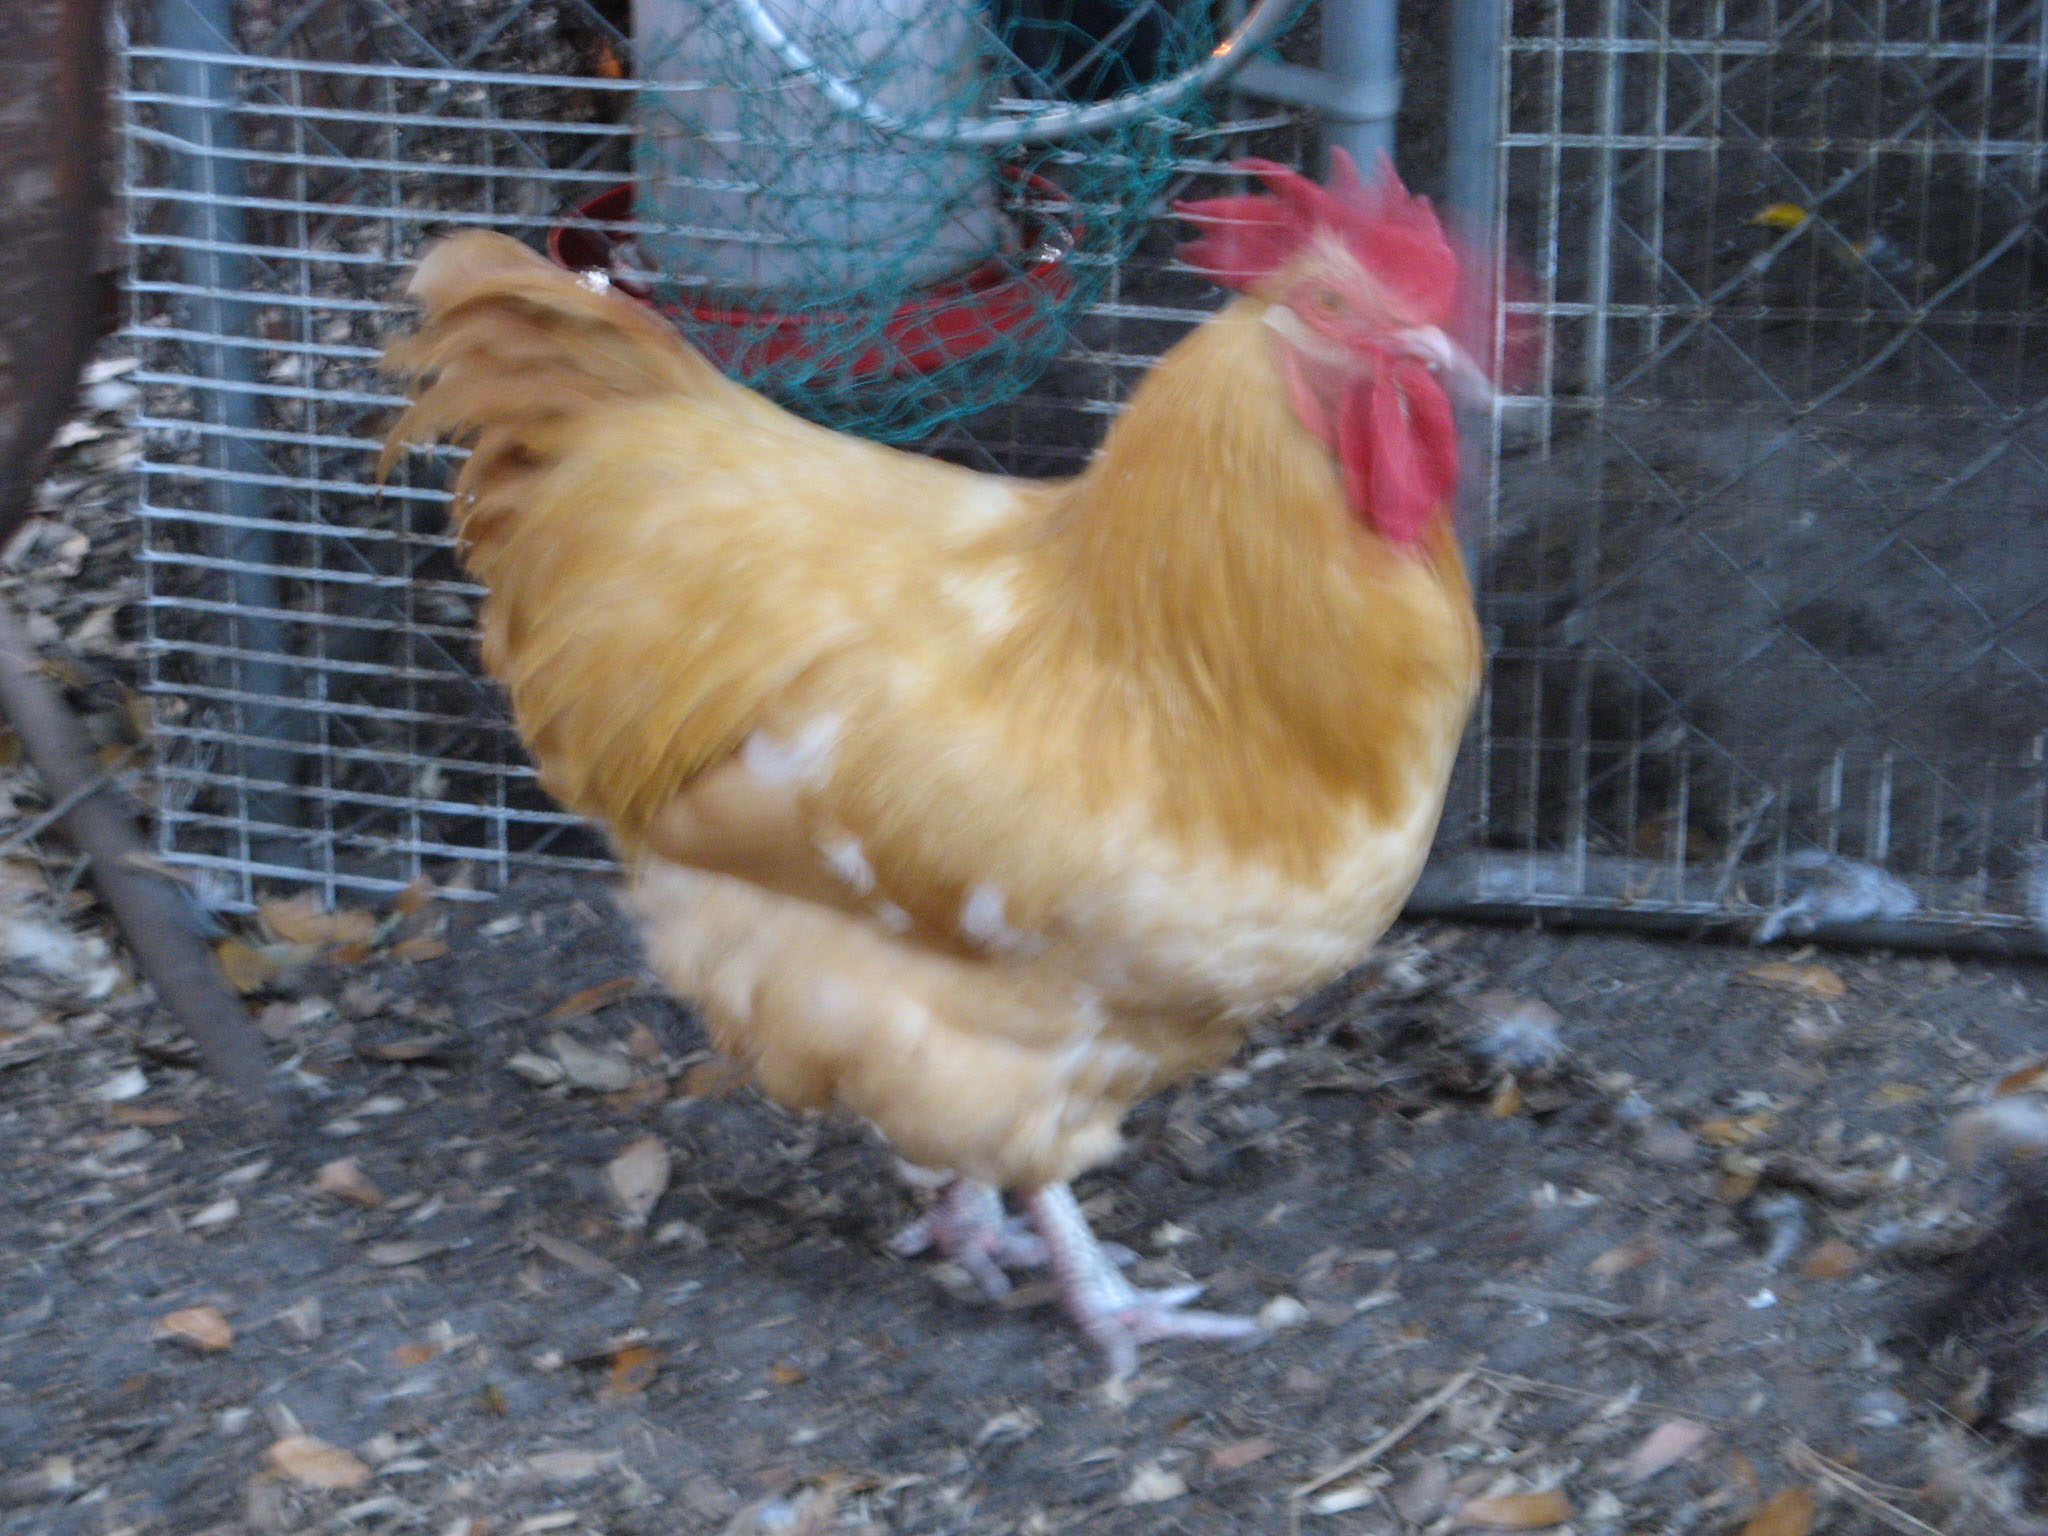 My rooster for my breeding flock for 2013.  He was still molting when this photo was taken.